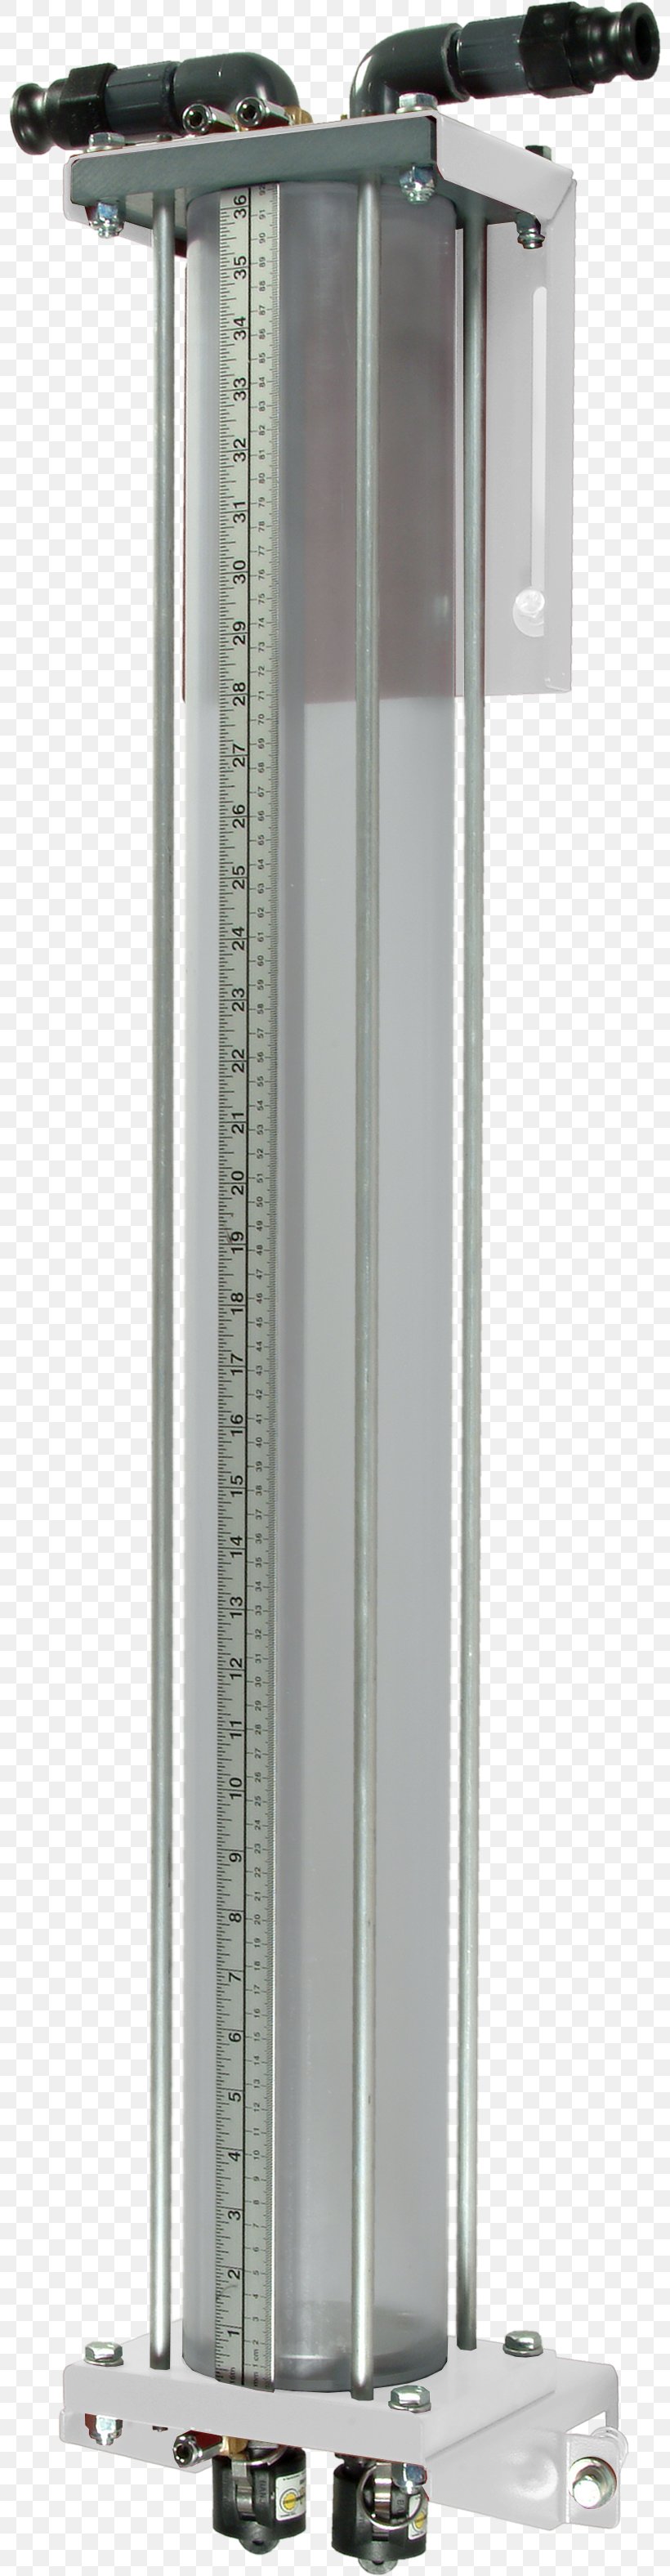 Cylinder Angle, PNG, 800x3152px, Cylinder, Hardware Download Free